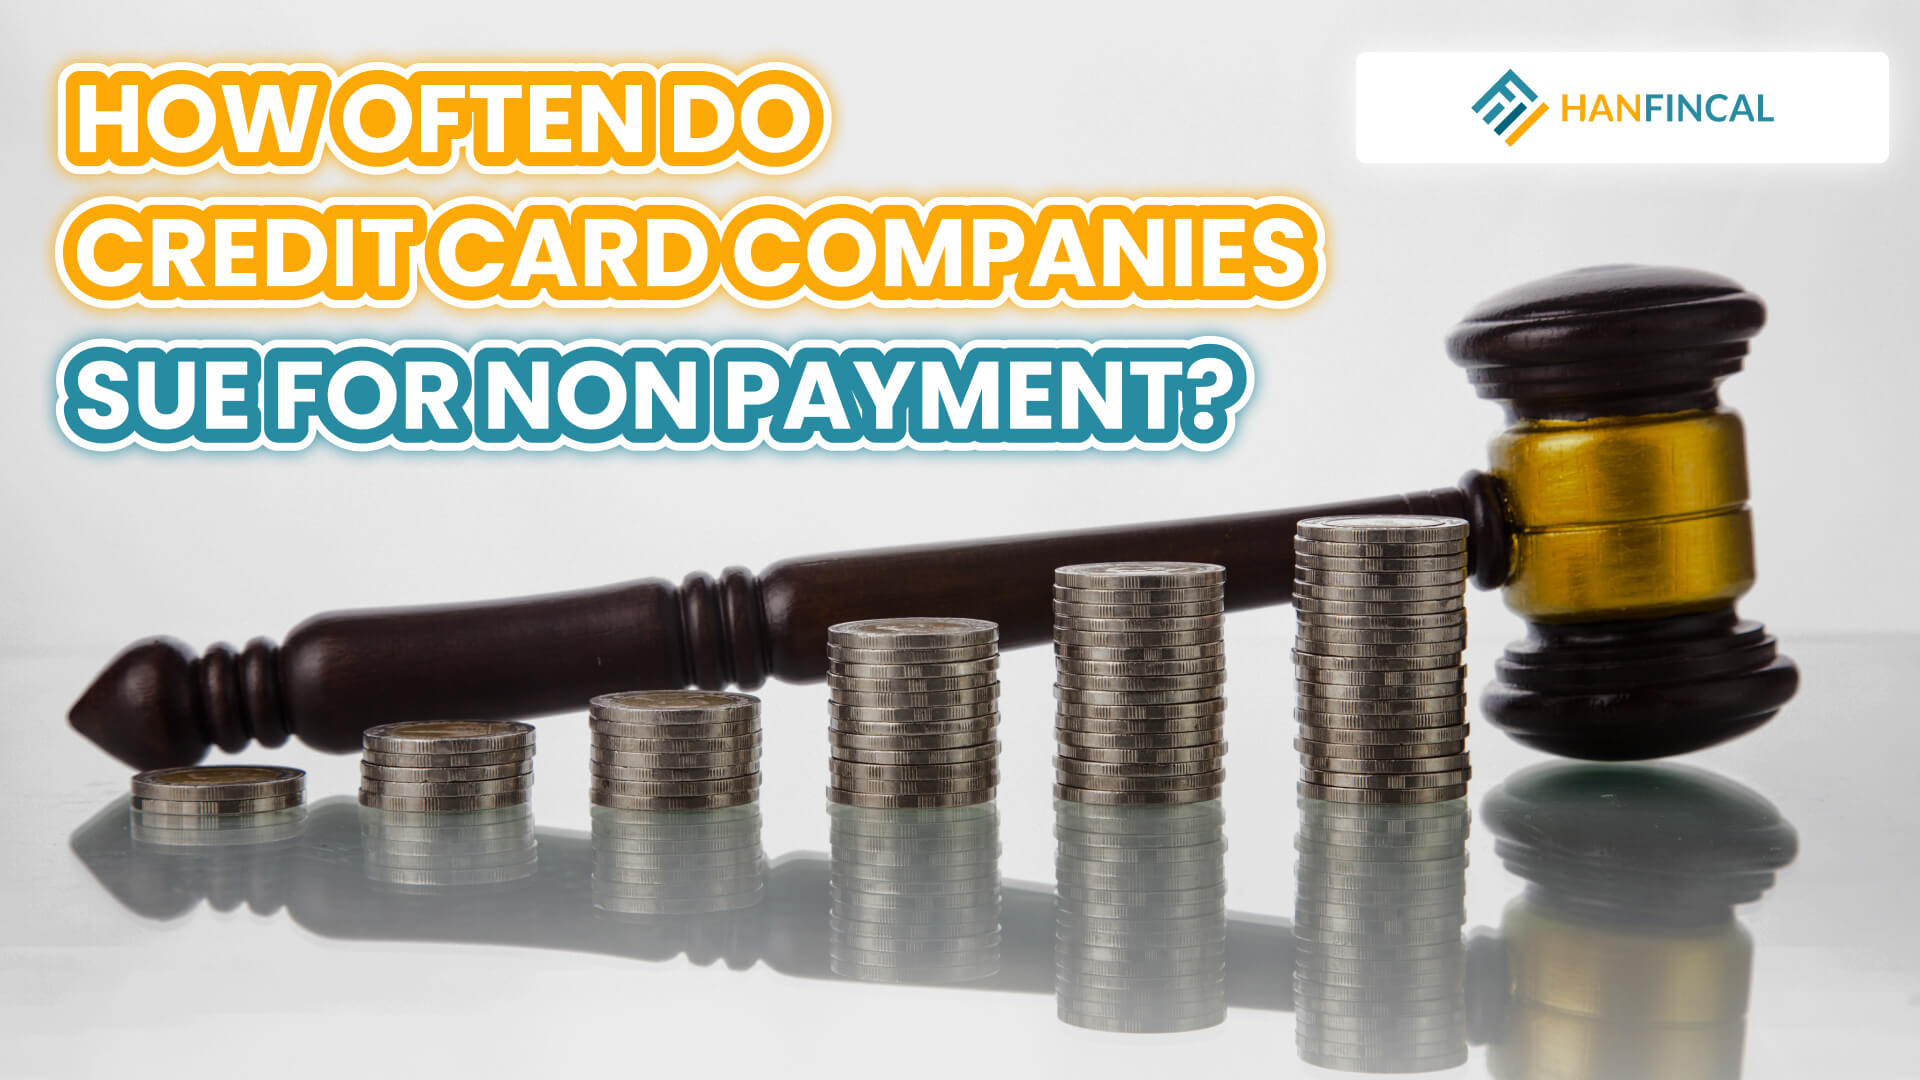 How Often Do Credit Card Companies Sue For Non Payment?